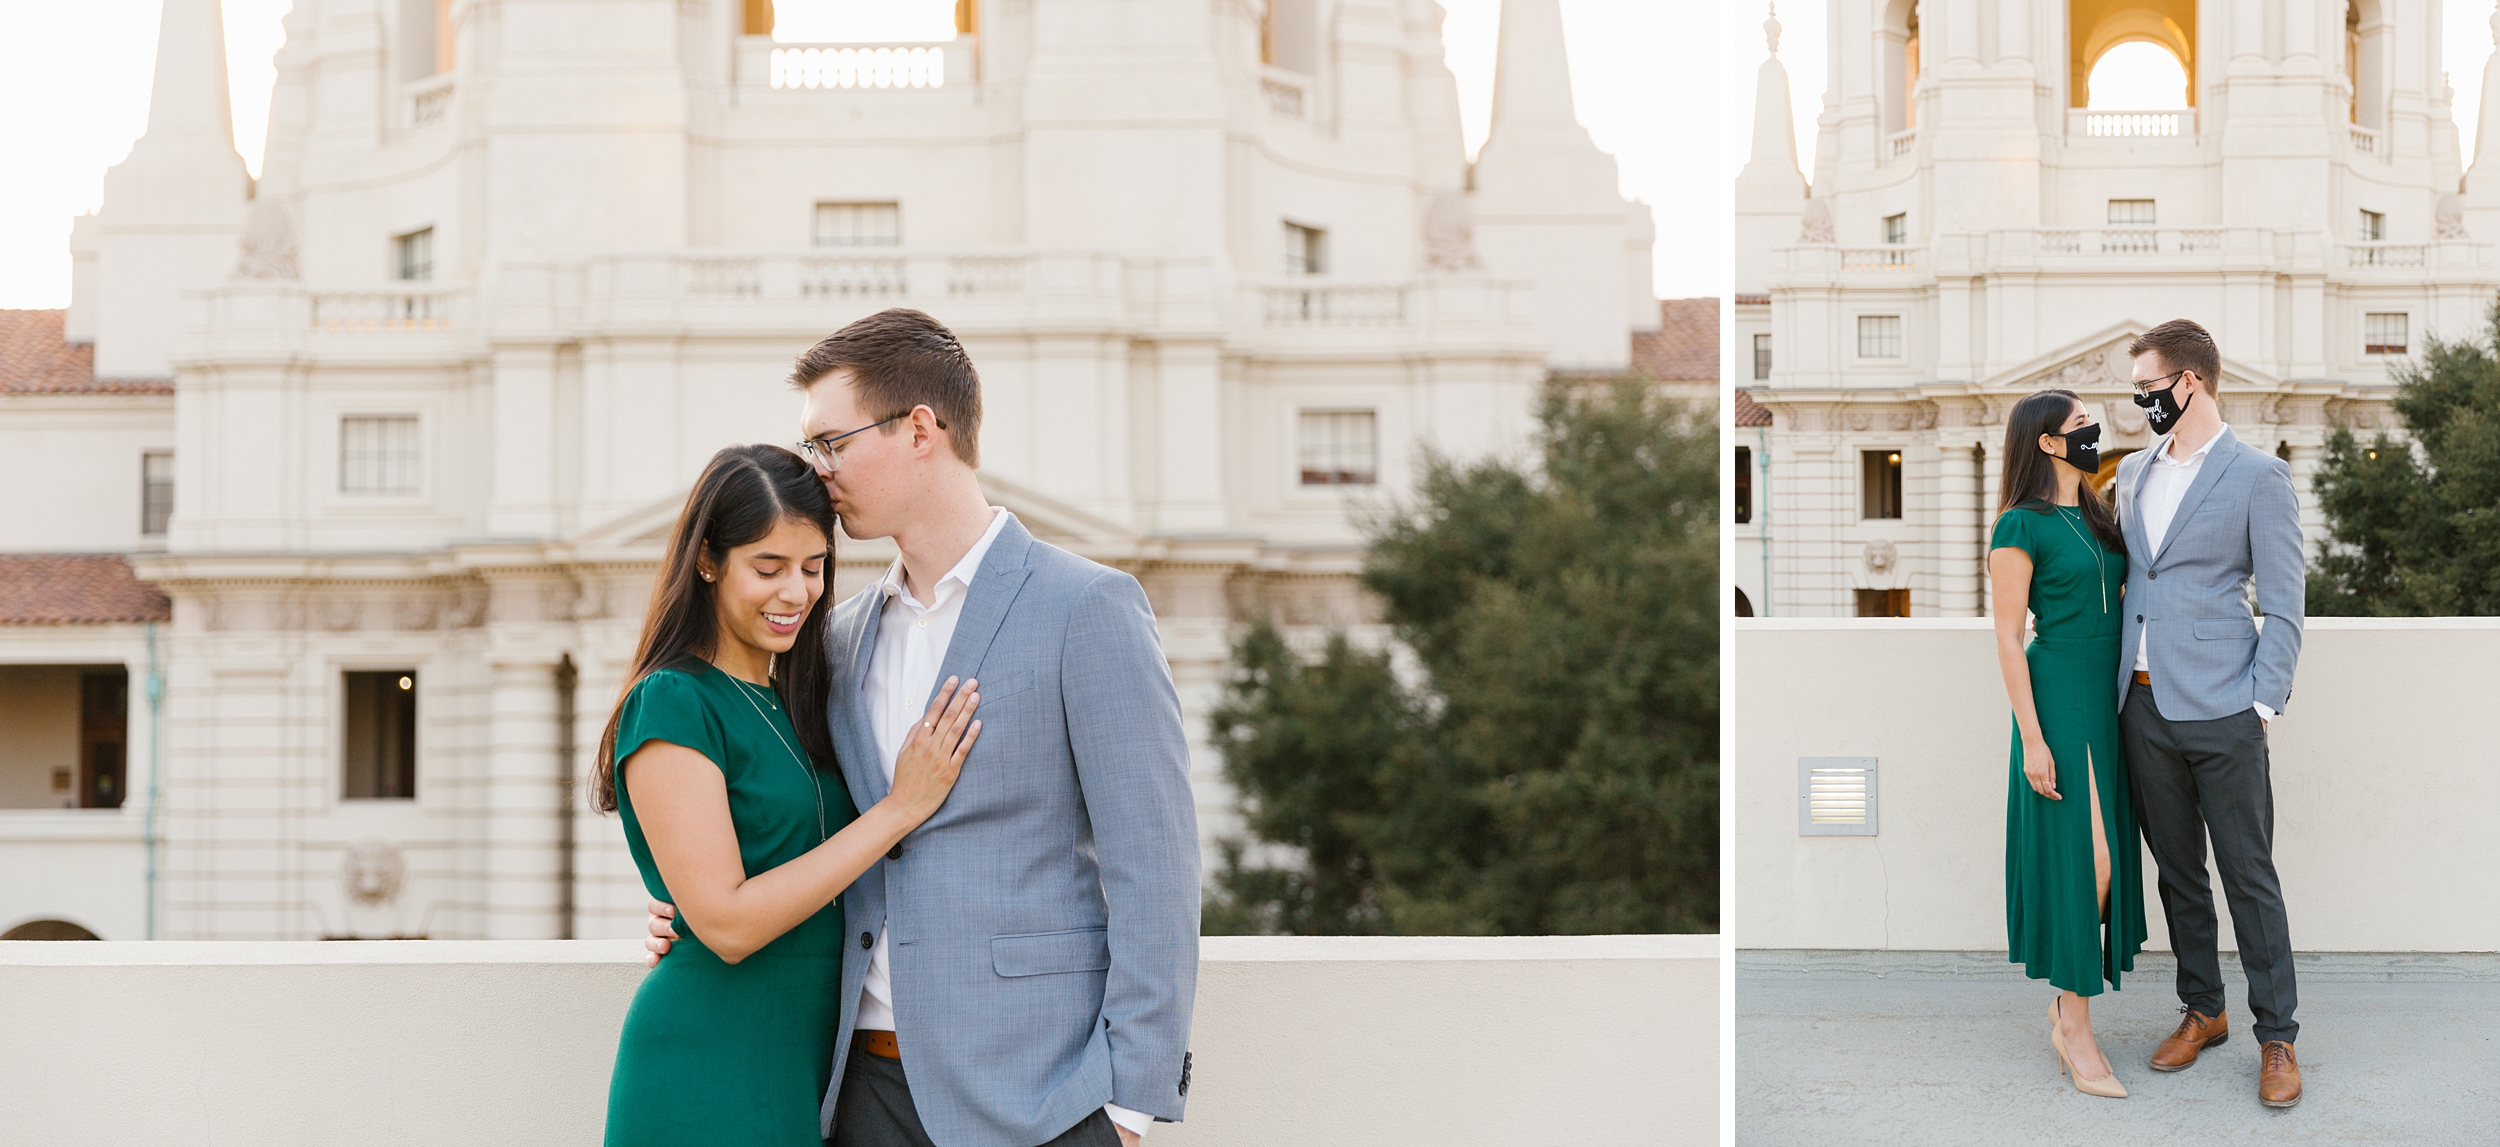 SoCal engagement photos in the time of COVID 